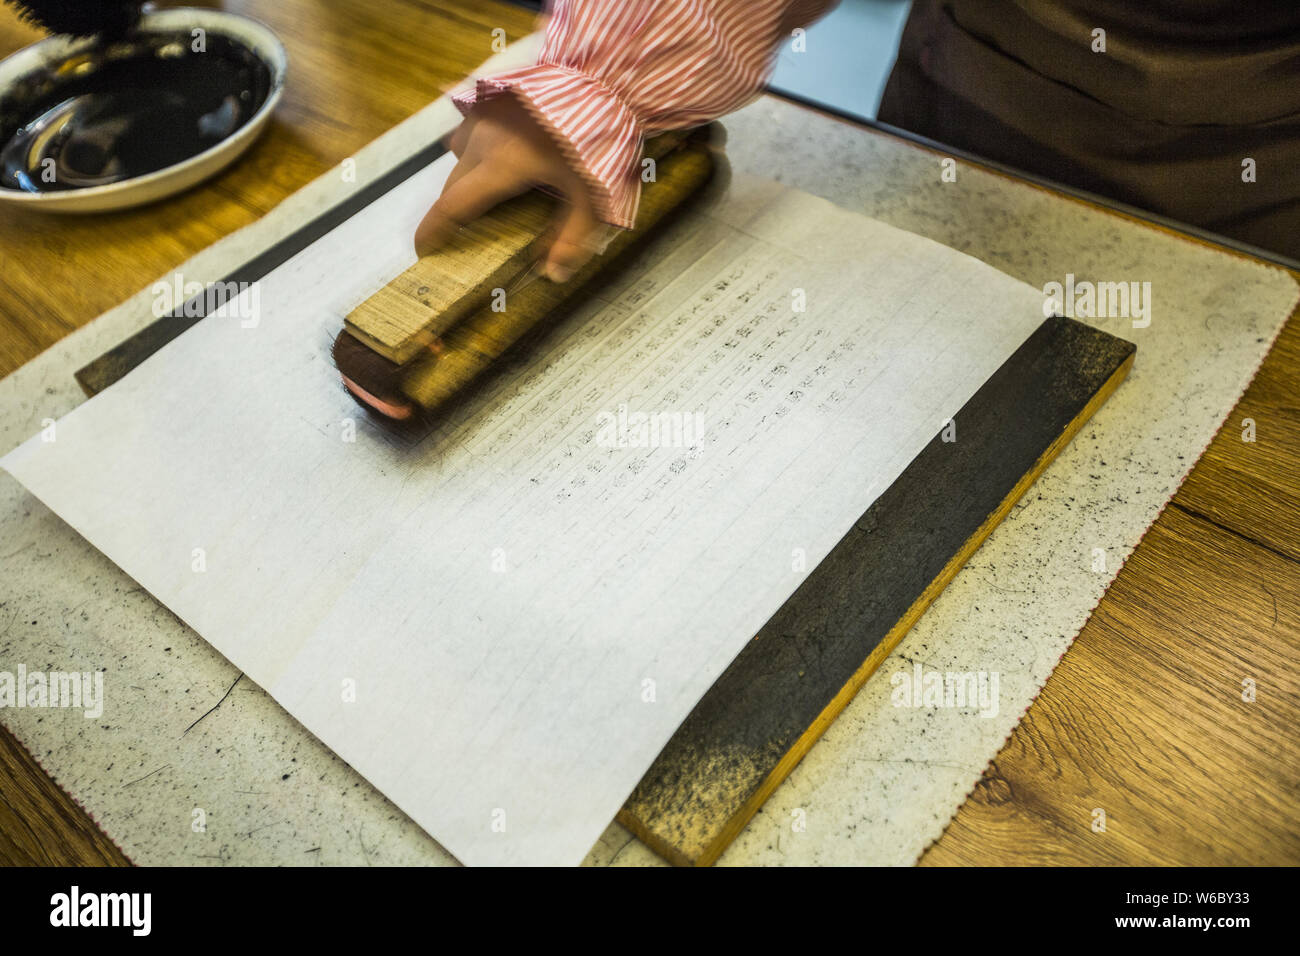 A visitor experiences woodblock printing at the China Bookstore in Beijing, China, 30 April 2018.   A woodblock printing event was held at the China B Stock Photo